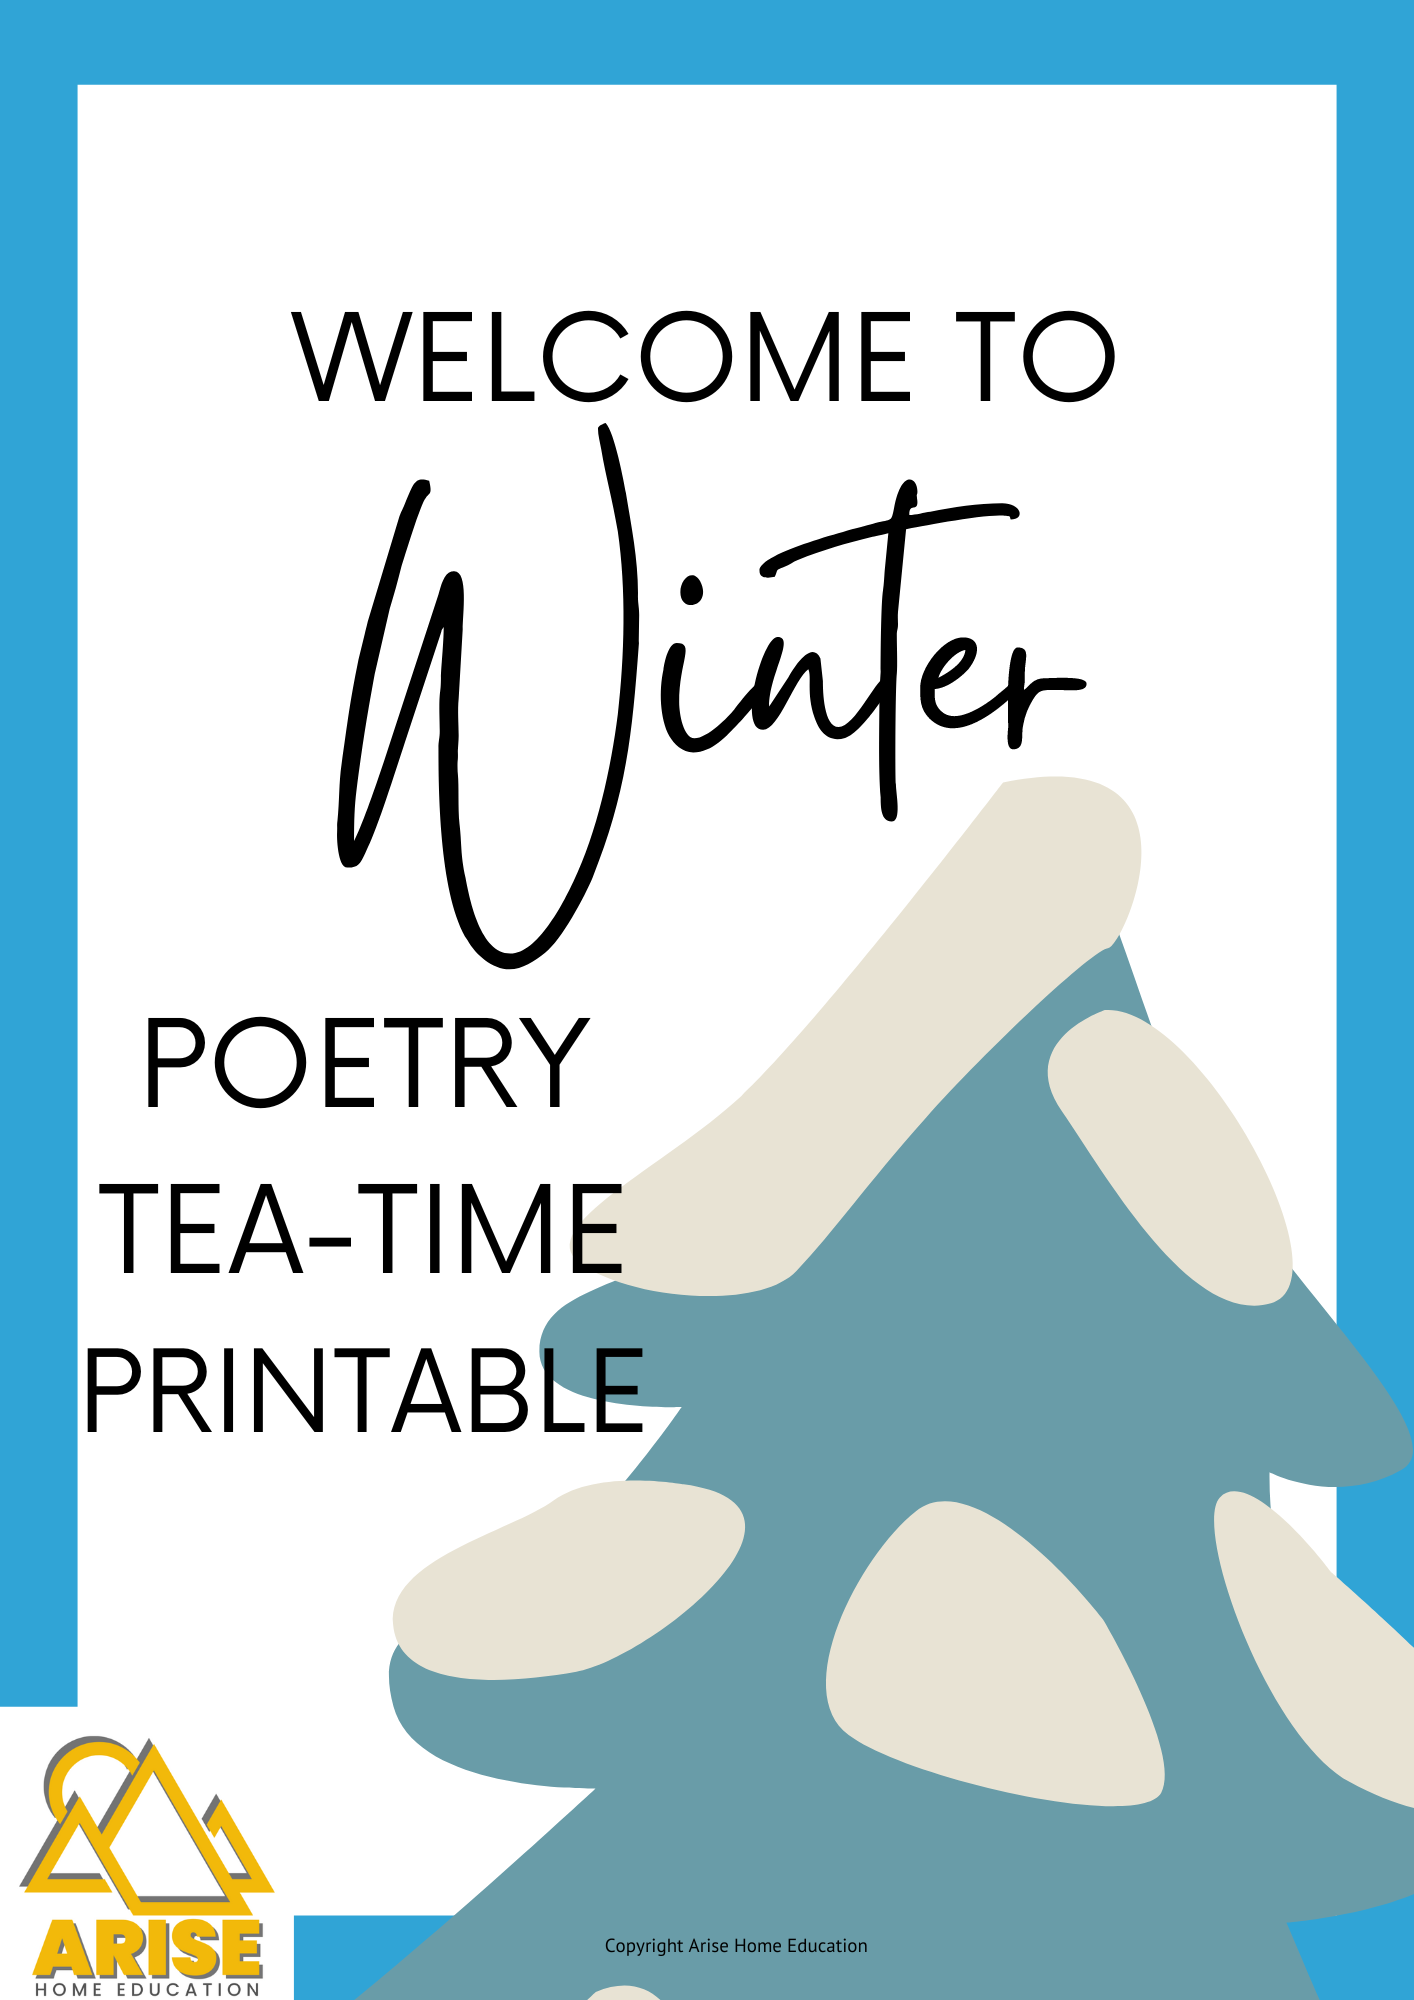 image of Winter Poetry Tea Time Pack Printable from AriseHomeEducation.com